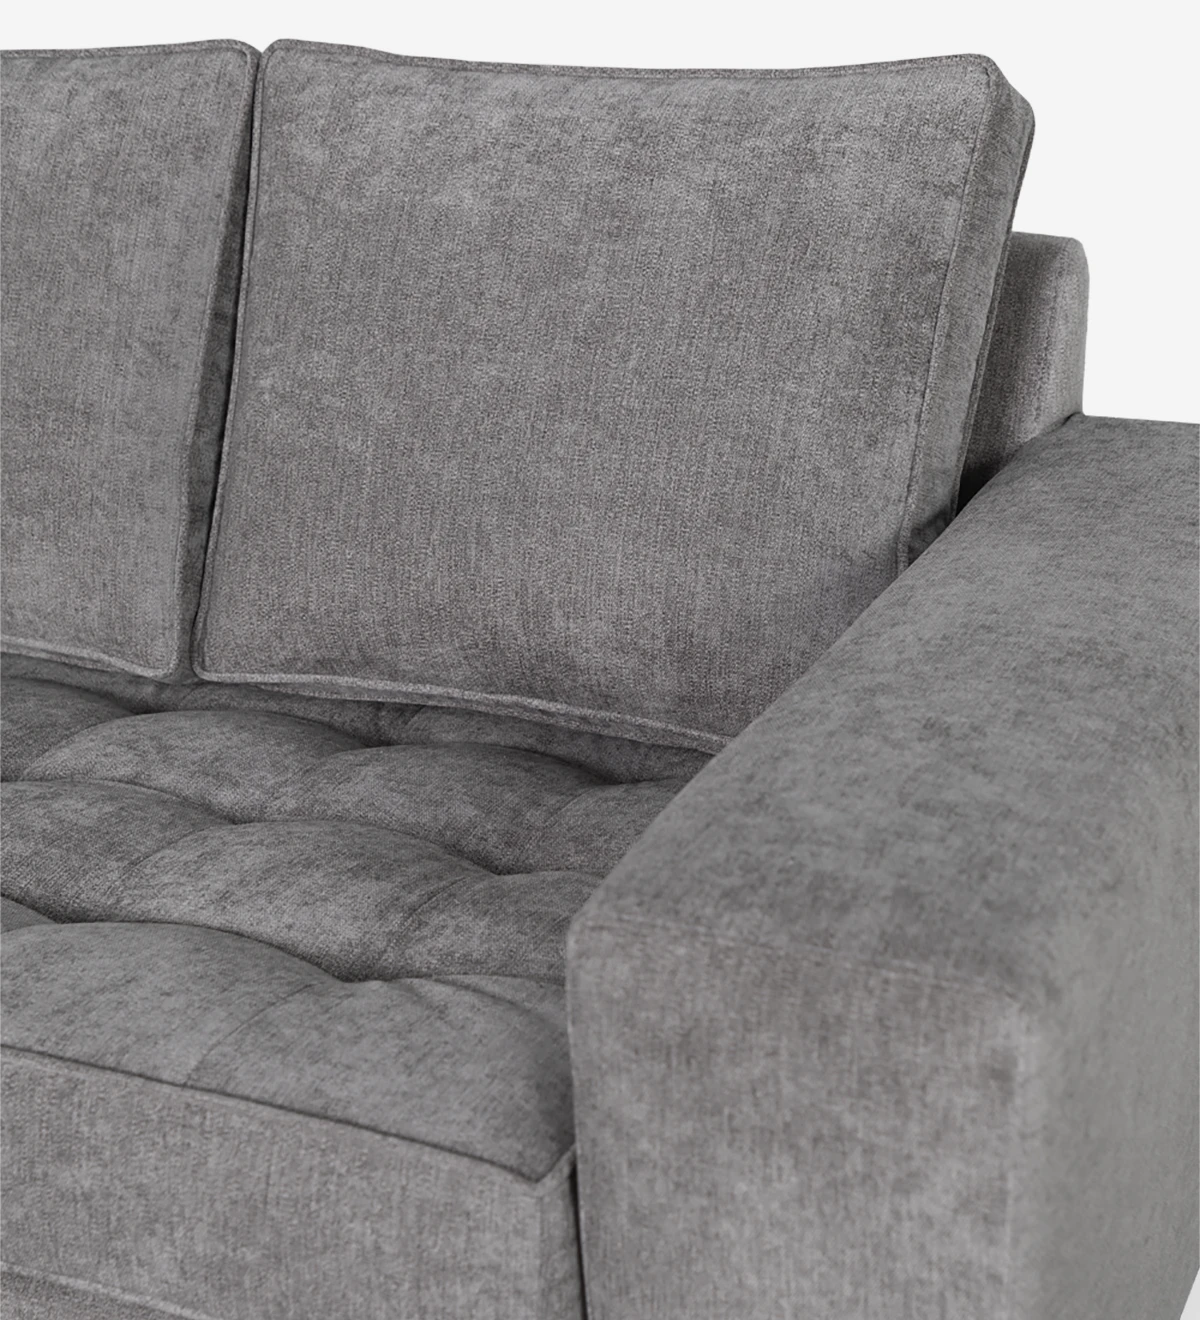 Barcelona 2-seater sofa upholstered in gray fabric, black lacquered metal feet, 165 cm.